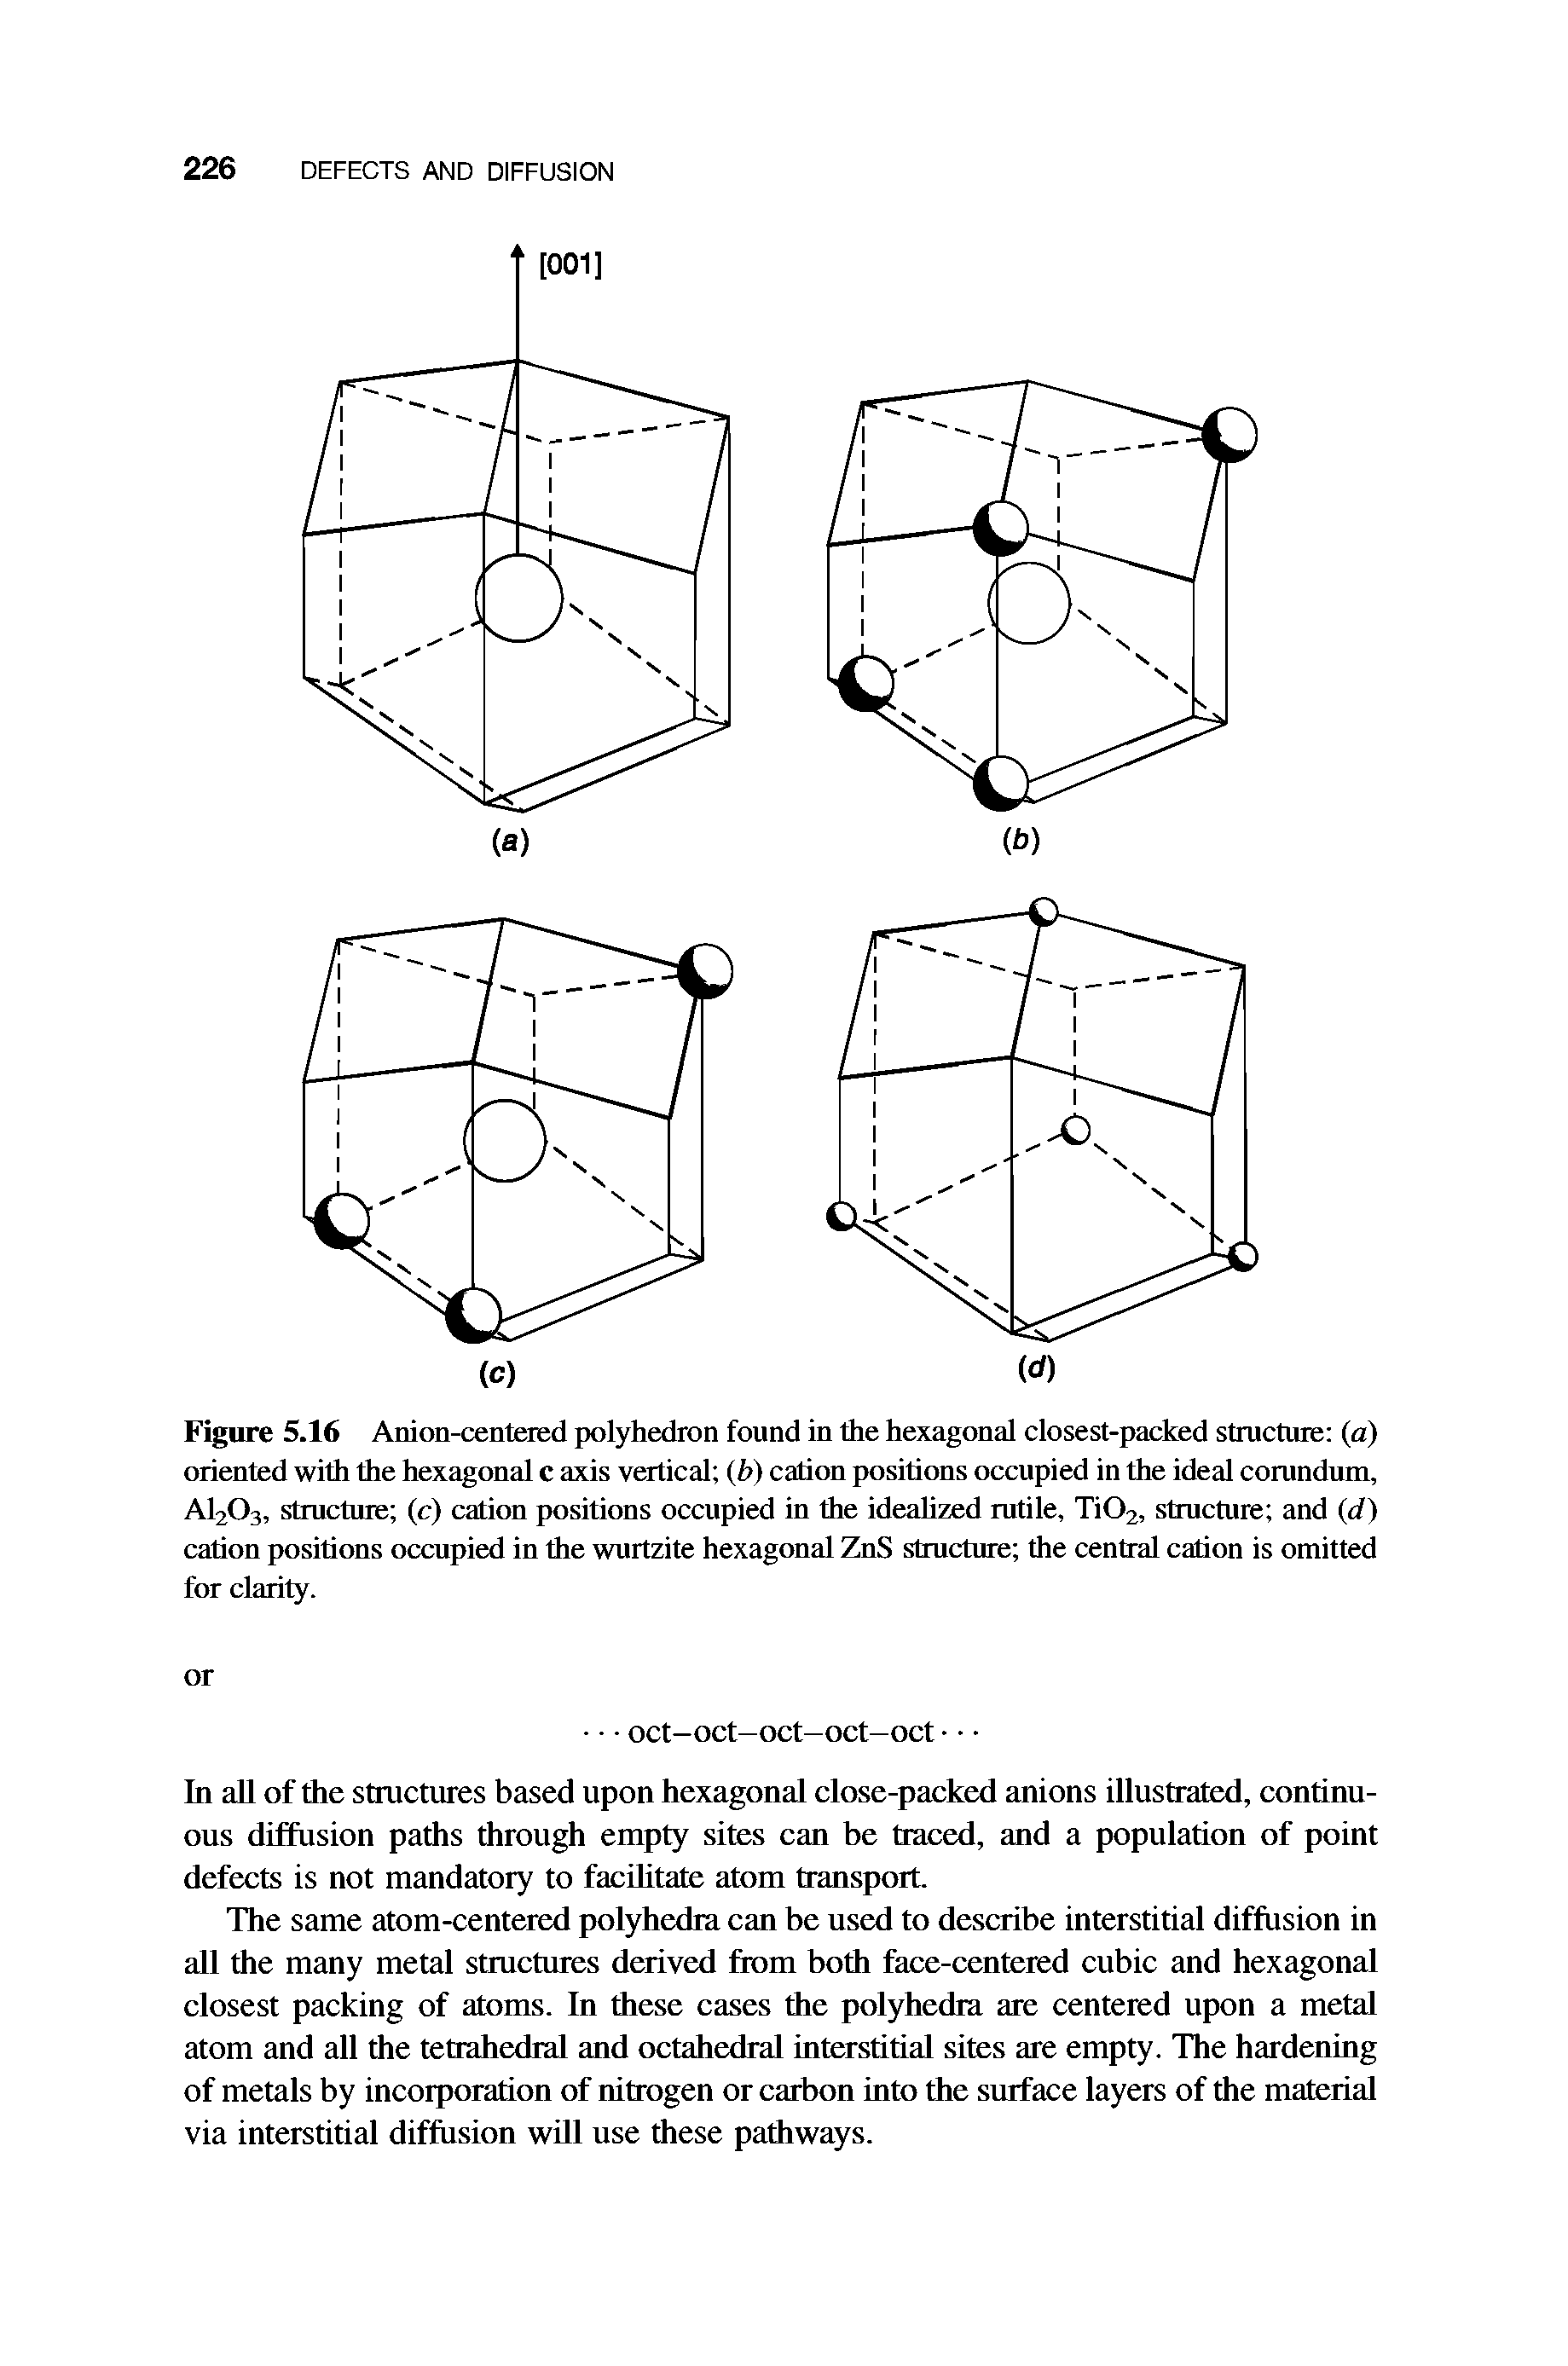 Figure 5.16 Anion-centered polyhedron found in the hexagonal closest-packed structure (a) oriented with the hexagonal c axis vertical (b) cation positions occupied in the ideal corundum, A1203, structure (c) cation positions occupied in the idealized rutile, Ti02, structure and (d) cation positions occupied in the wurtzite hexagonal ZnS structure the central cation is omitted for clarity.